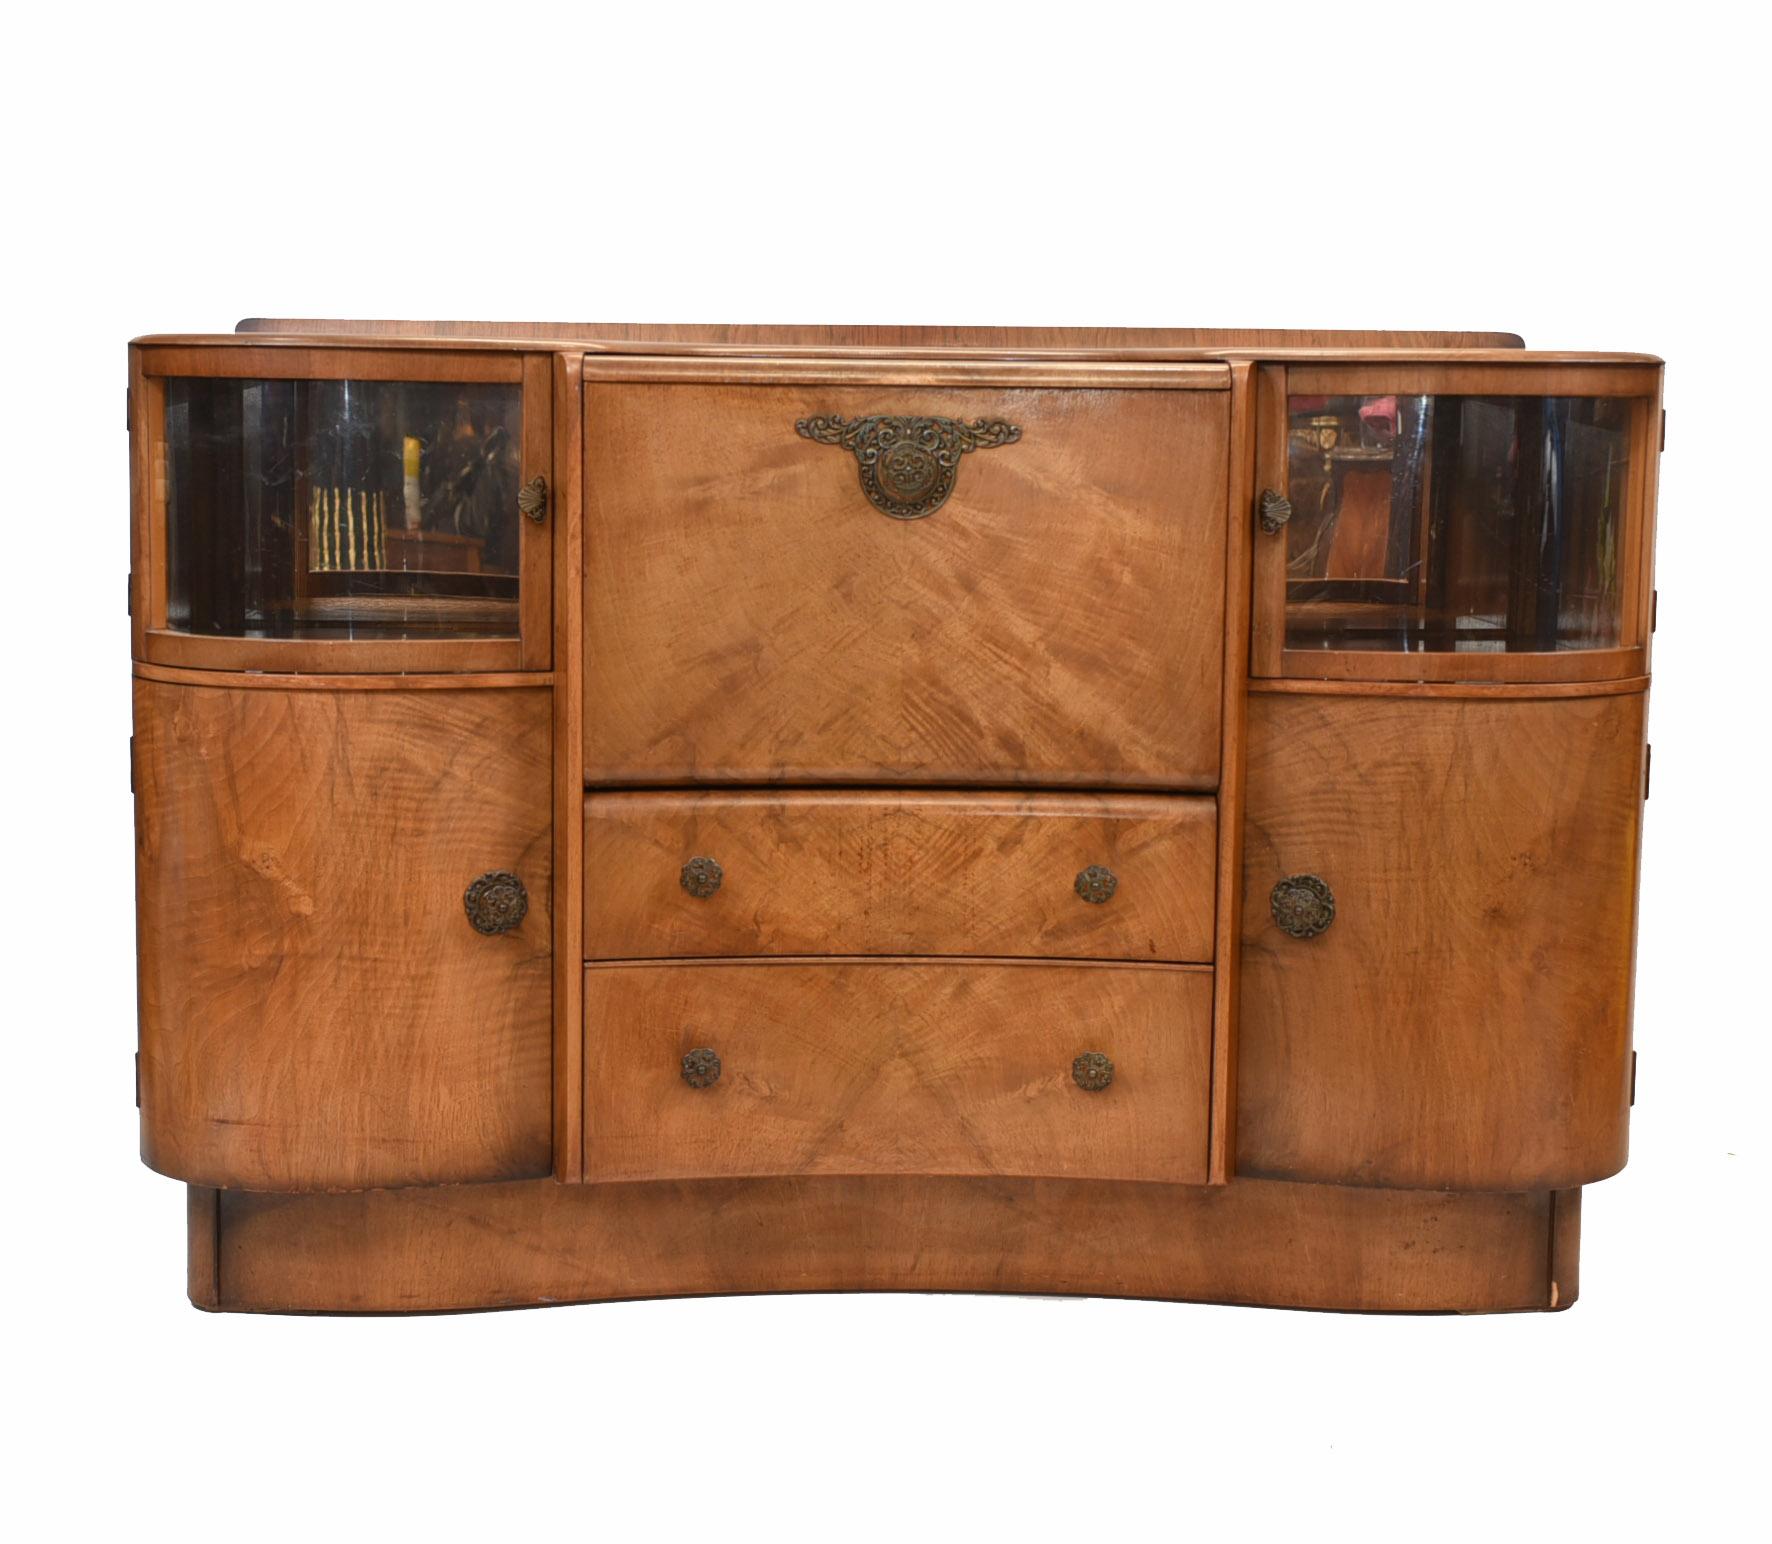 Cool period Art Deco drinks or cocktail cabinet
Circa 1930 on this wonderful piece
Opens out to reveal drink mixing section
Lots of storage with drawers and cupboards
Viewings available by appointment
Offered in great shape ready for home use